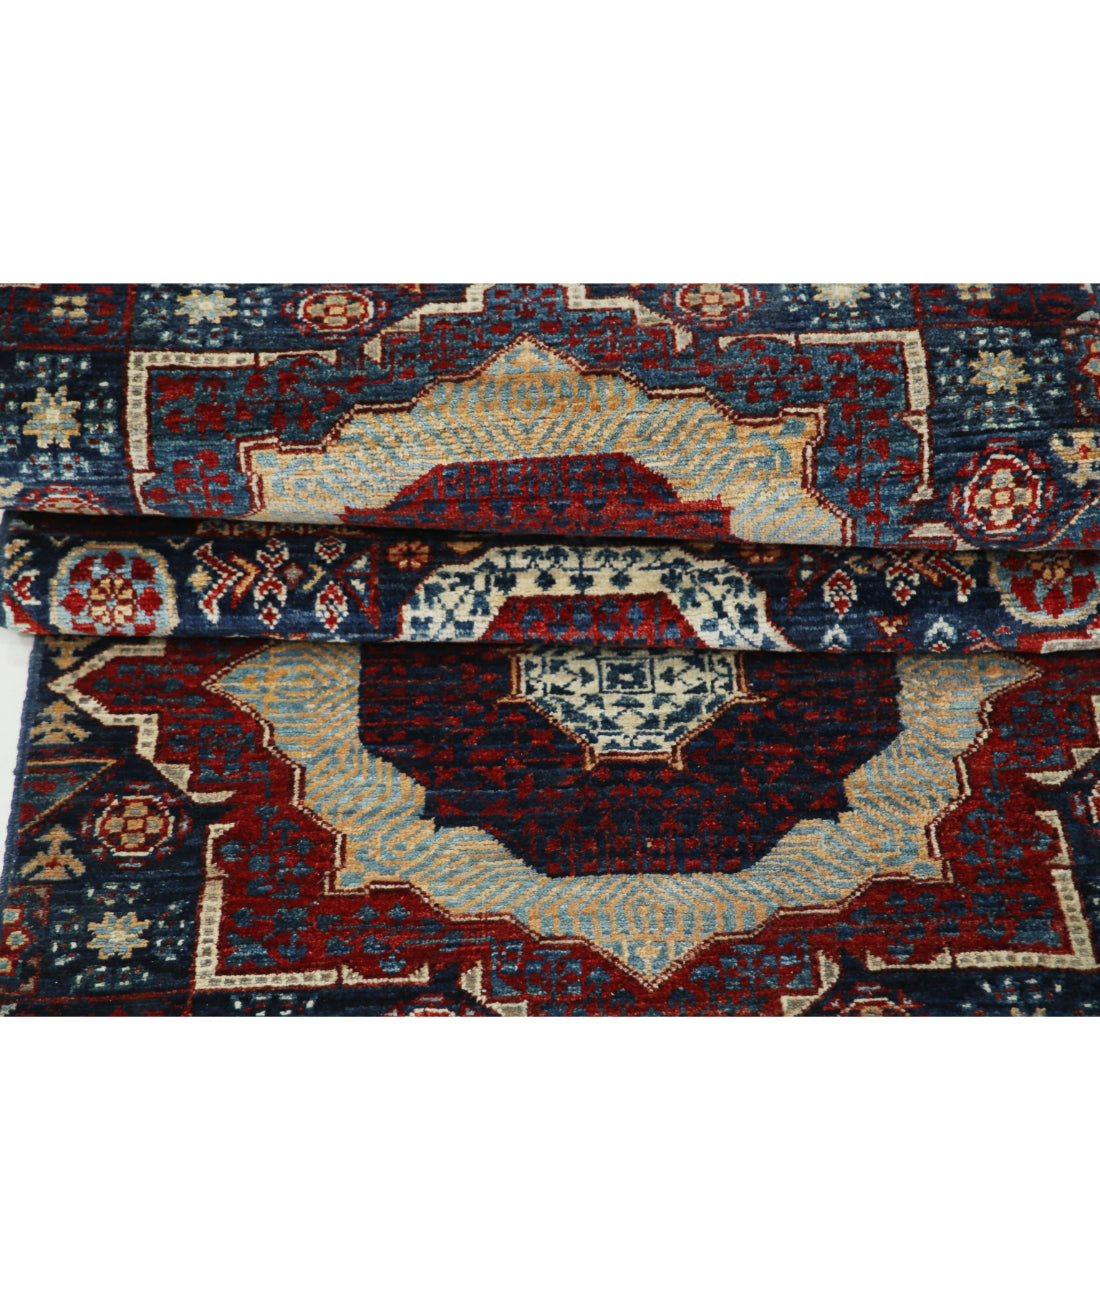 Mamluk 2'5'' X 22'4'' Hand-Knotted Wool Rug 2'5'' x 22'4'' (73 X 670) / Blue / Red